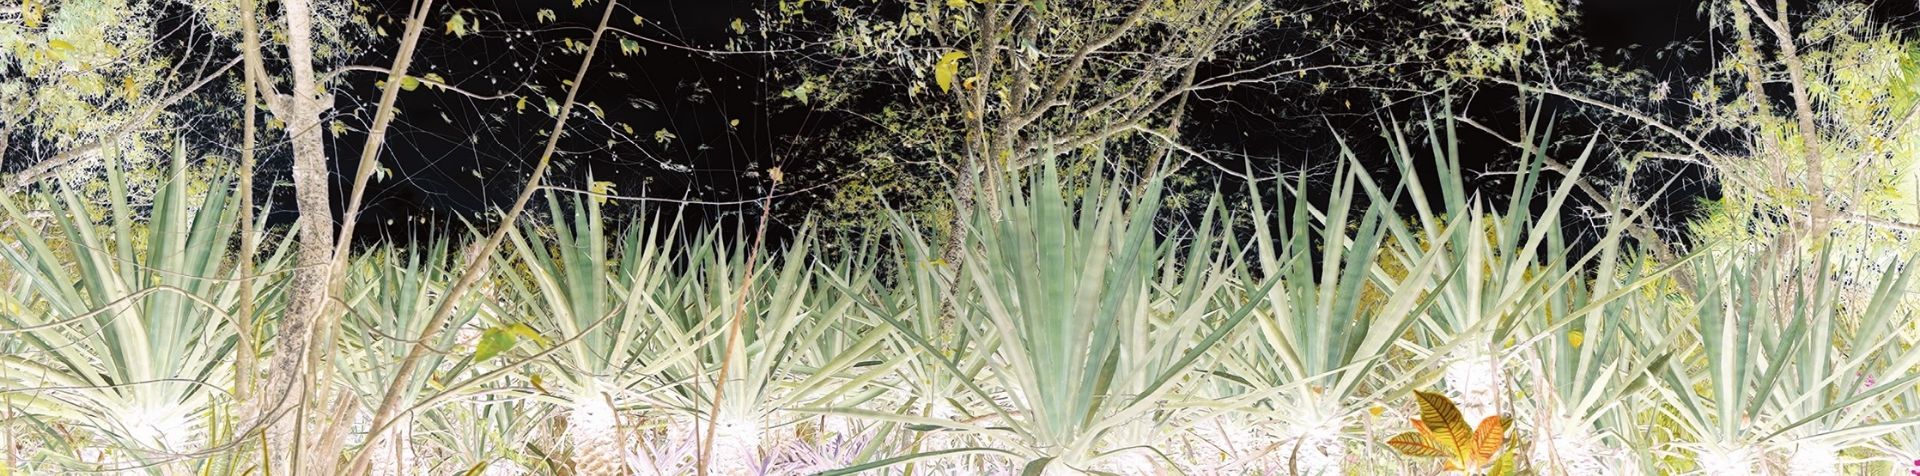 A view across the floor of a field filled with pineapple plants with trees behind. The image is in negative.